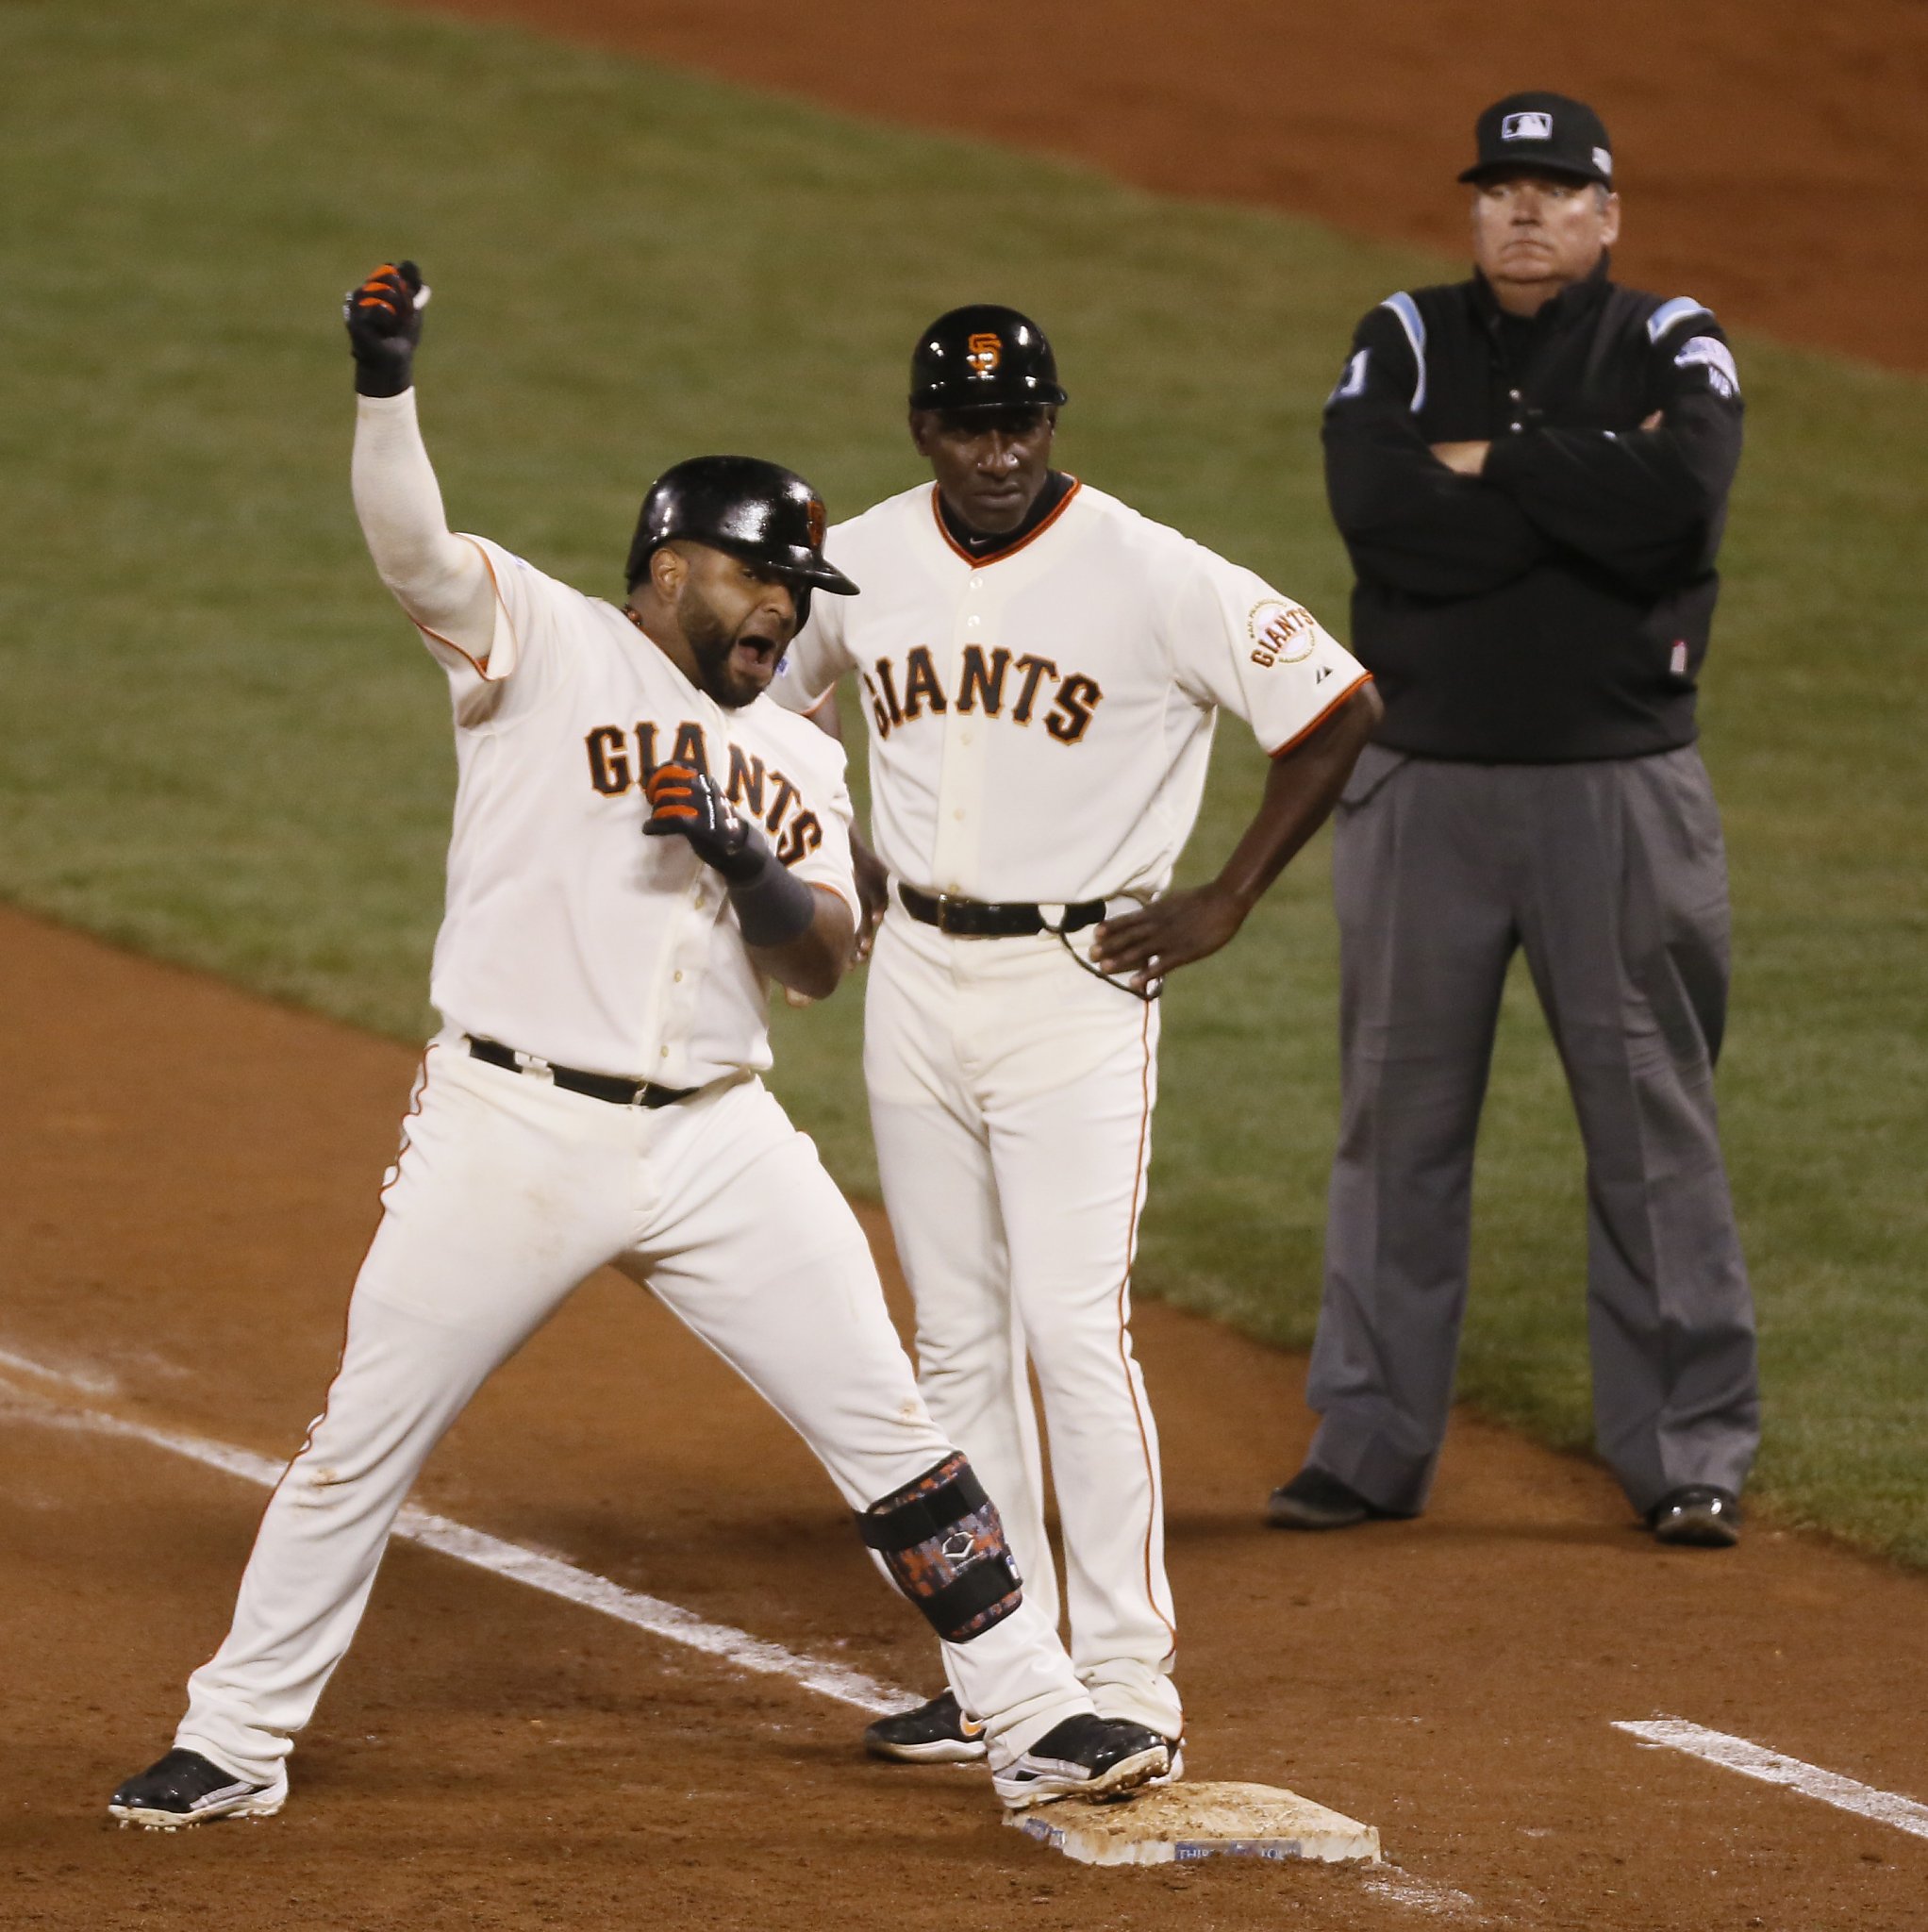 Giants will miss Pablo Sandoval, but he'll miss S.F., too